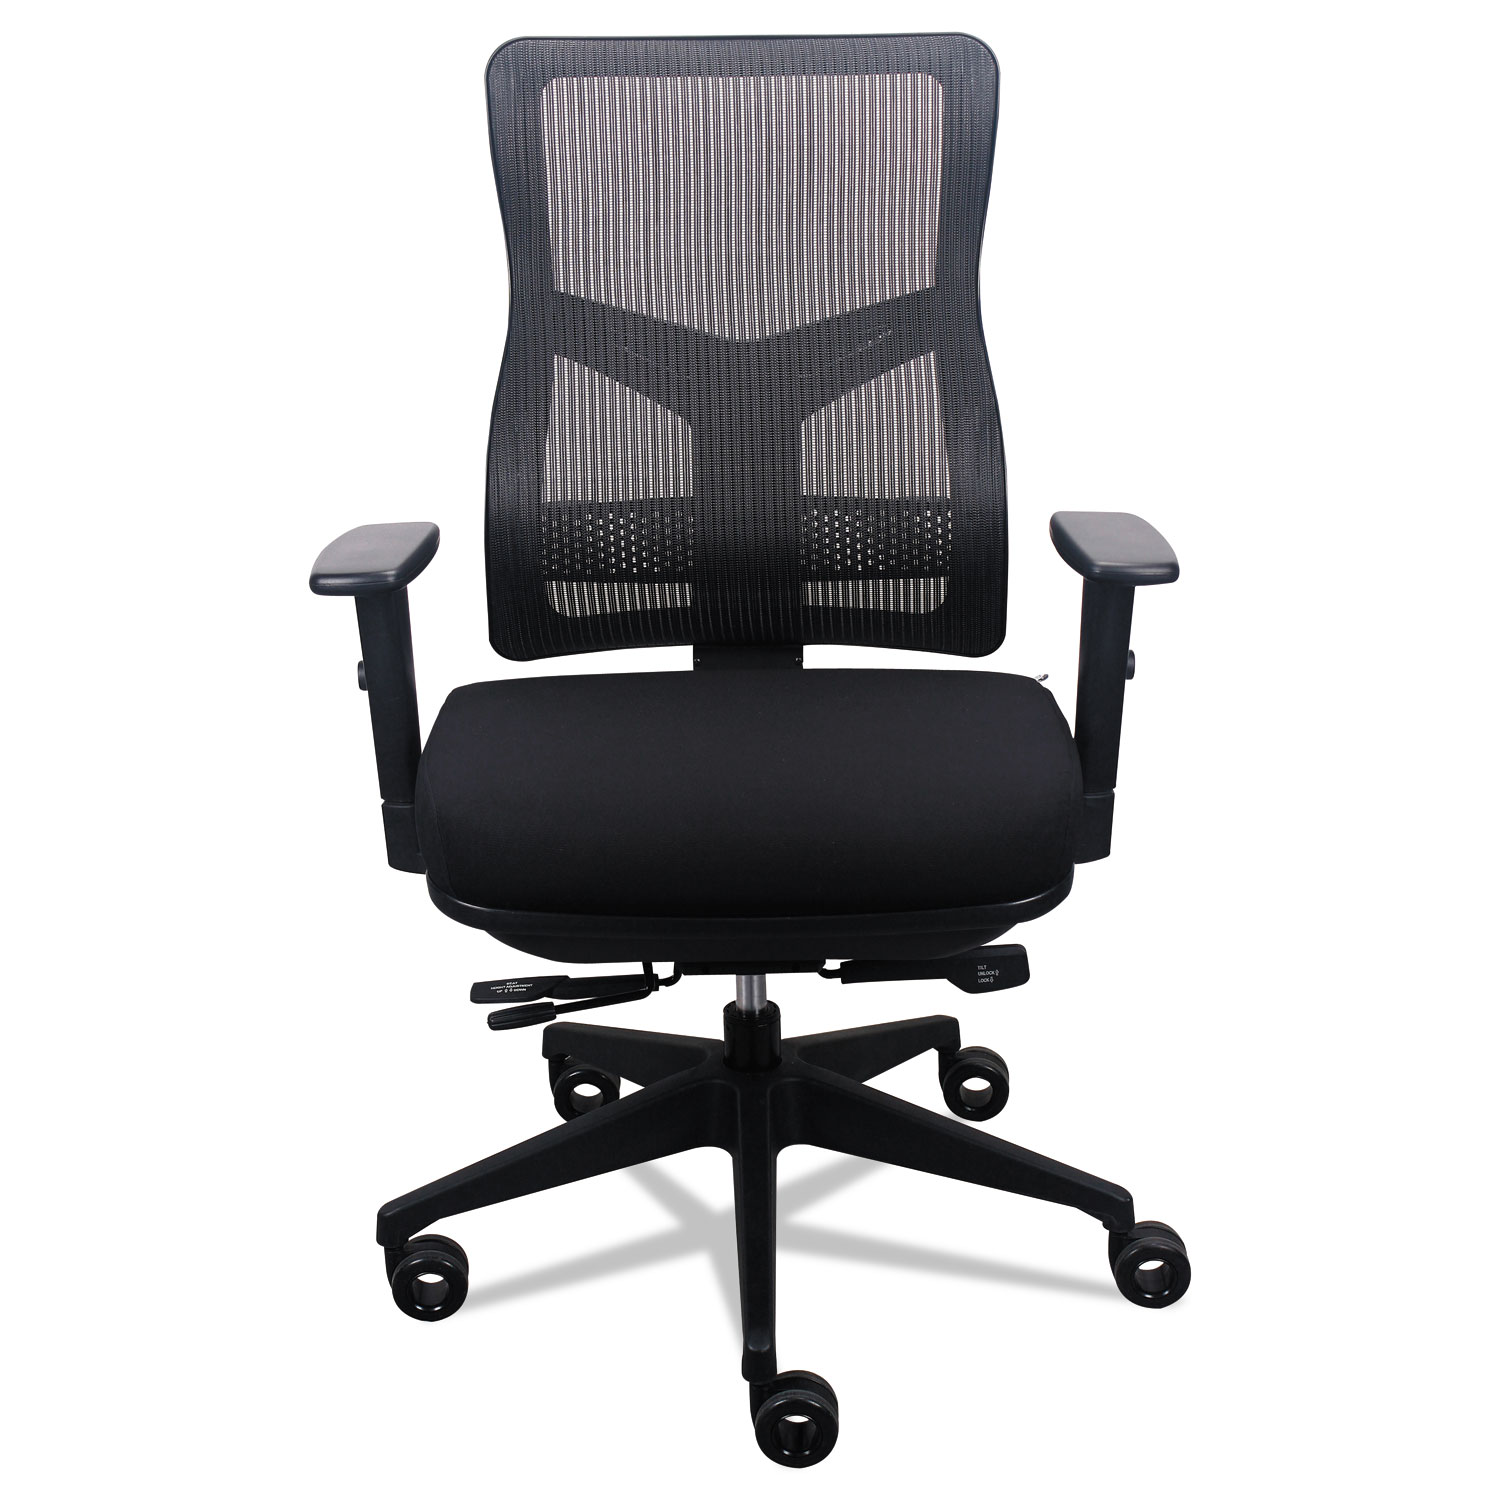 200 Mesh-Back Multifunction Chair, Supports up to 250 lbs., Black Seat/Black Back, Black Base